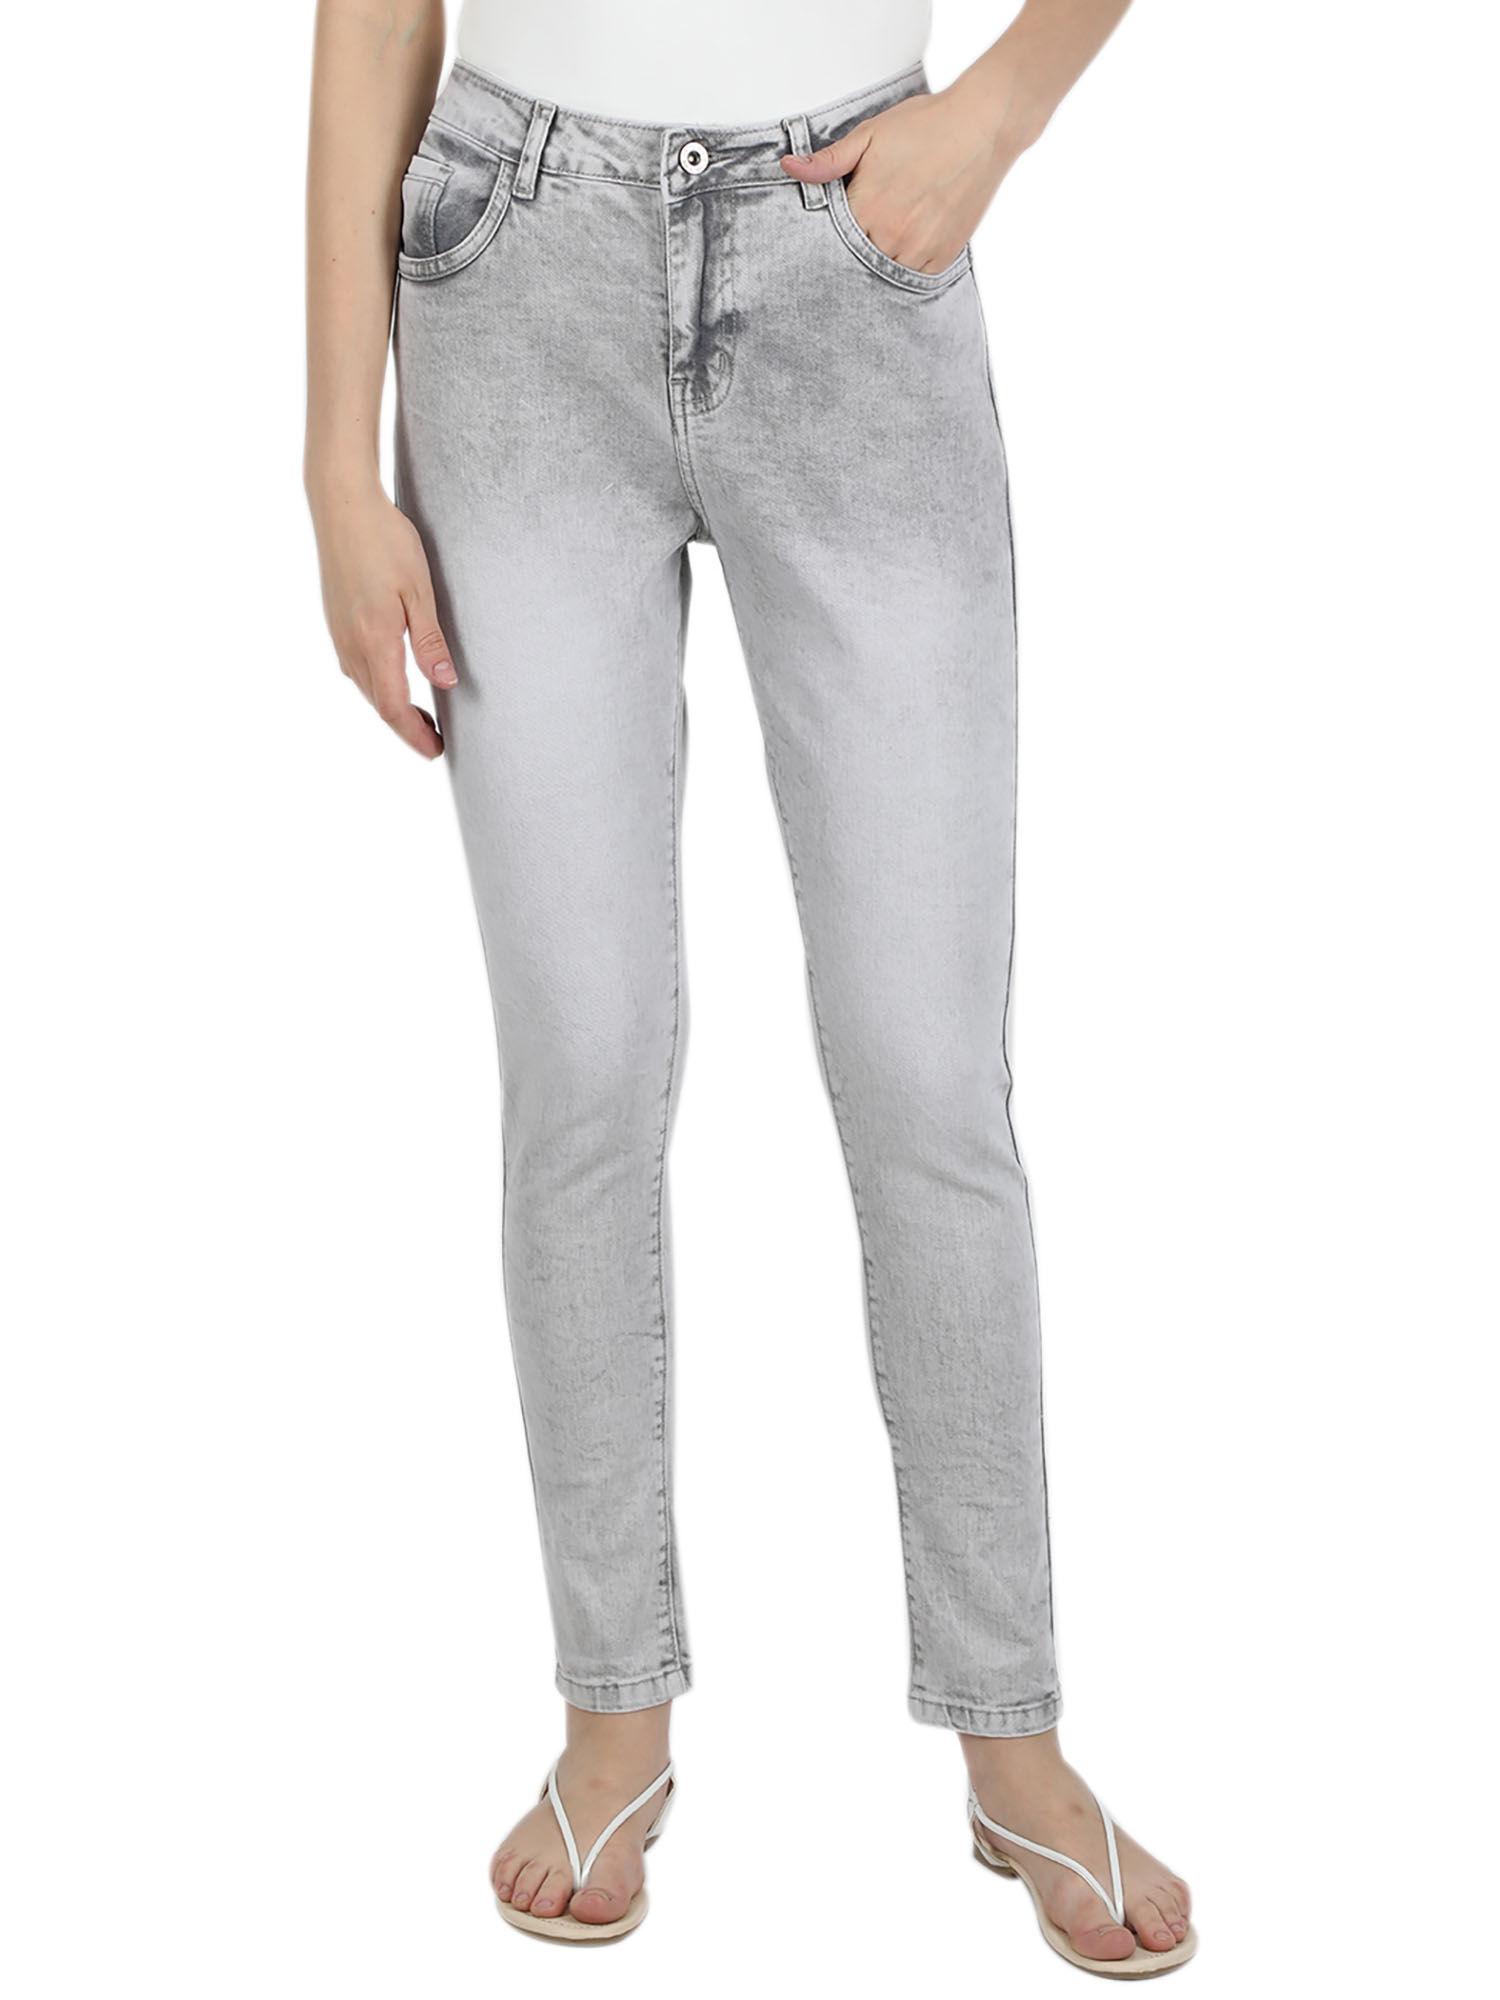 grey solid jeans and jeggings